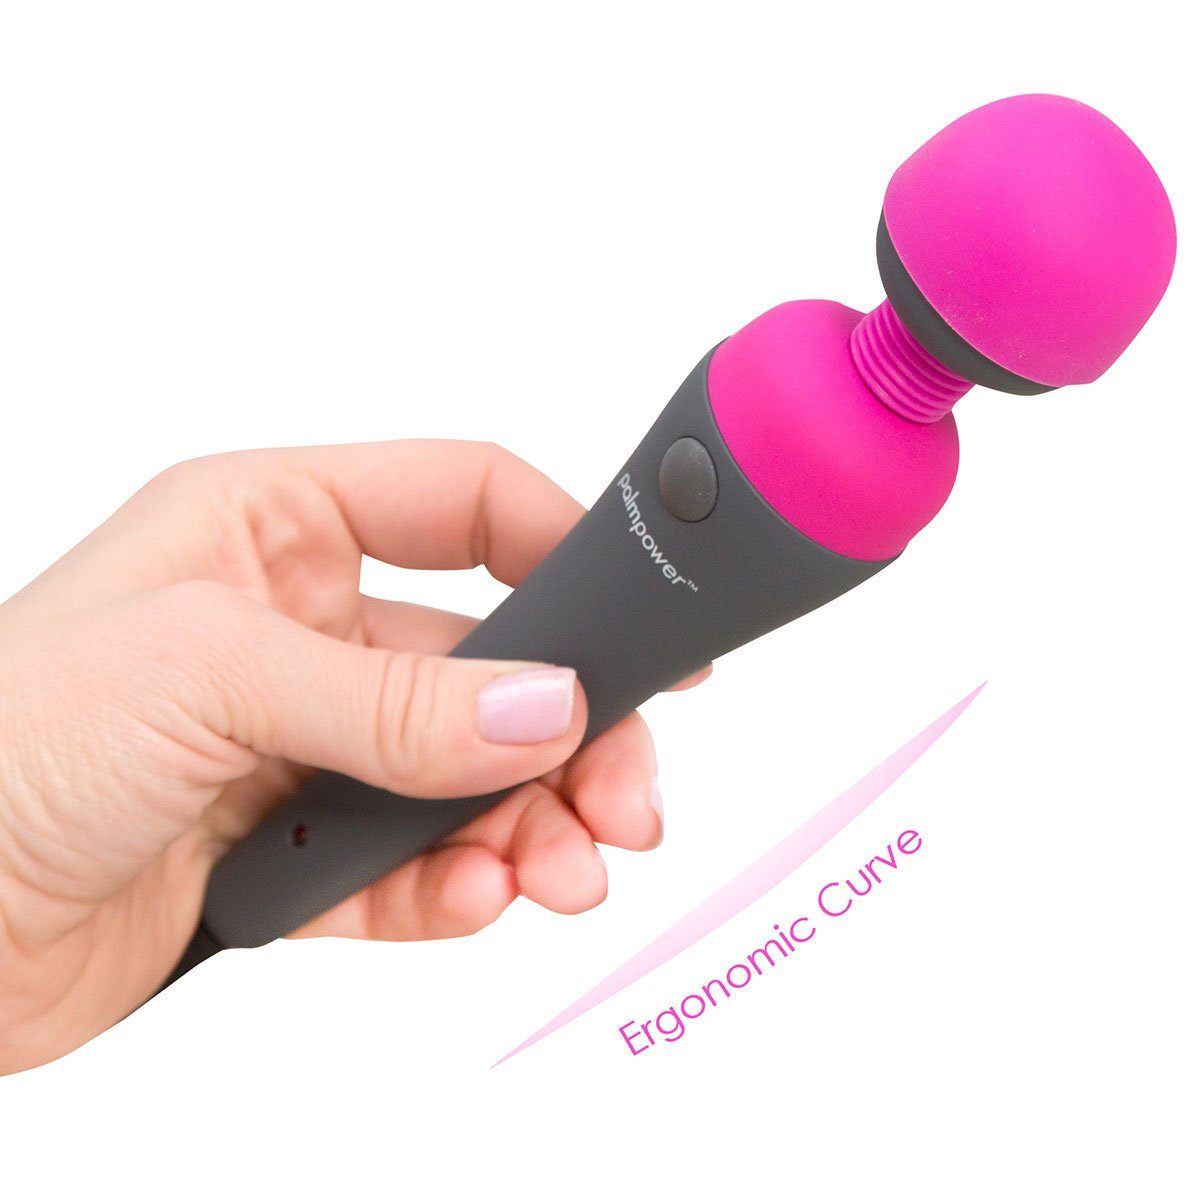 BMS PalmPower Wand Massager With Removable Silicone Cap - Hamilton Park Electronics